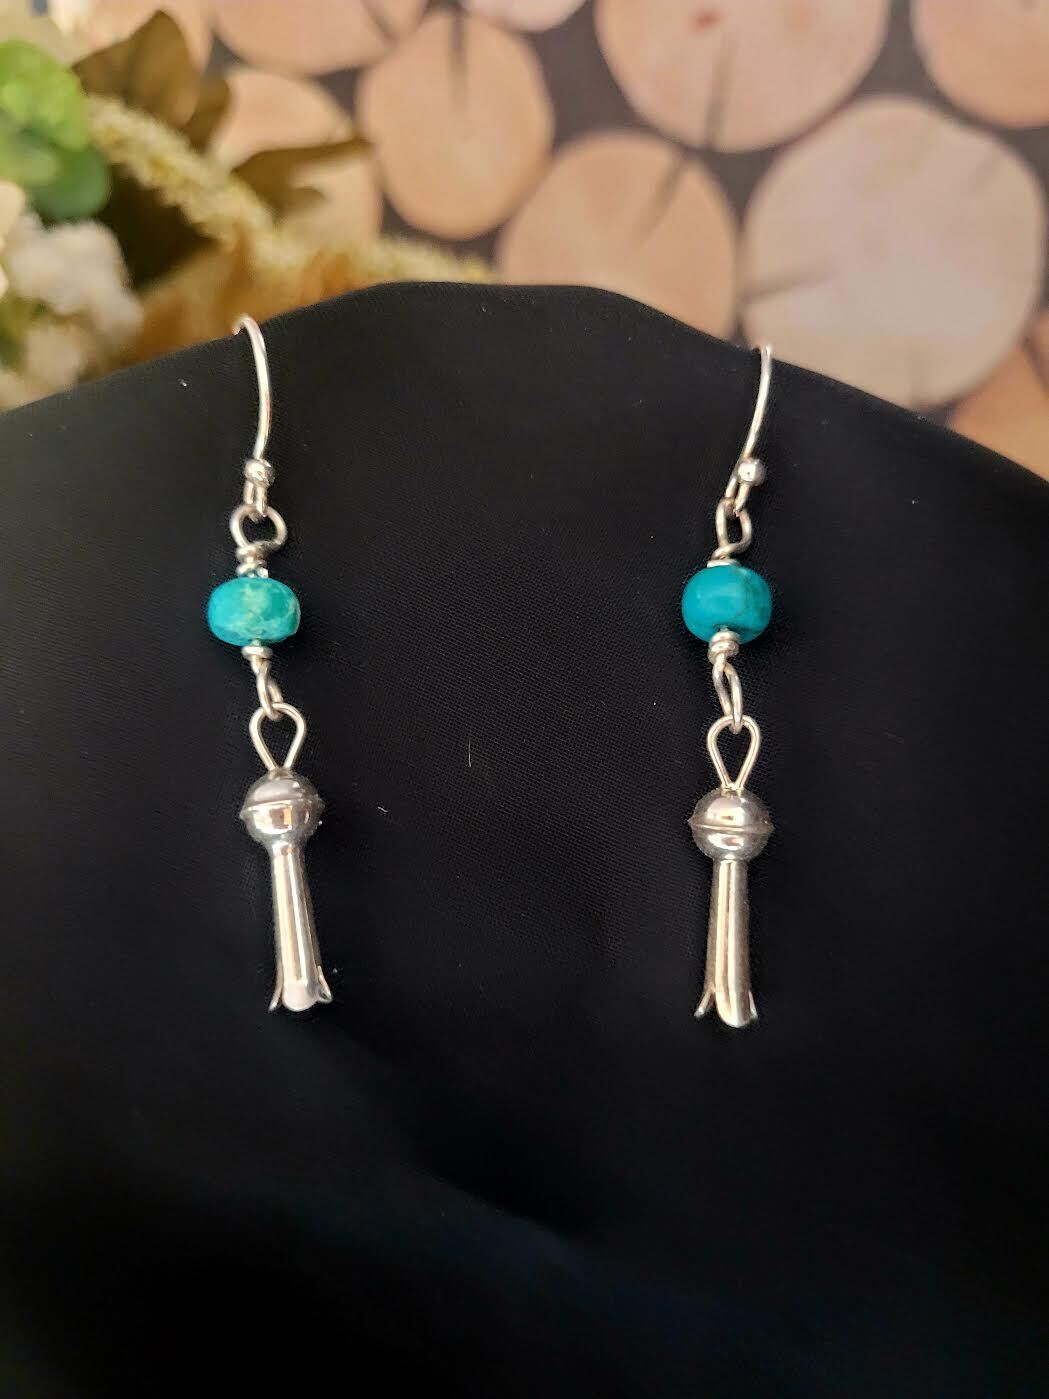 Turquoise and Sterling squash blossom style earrings